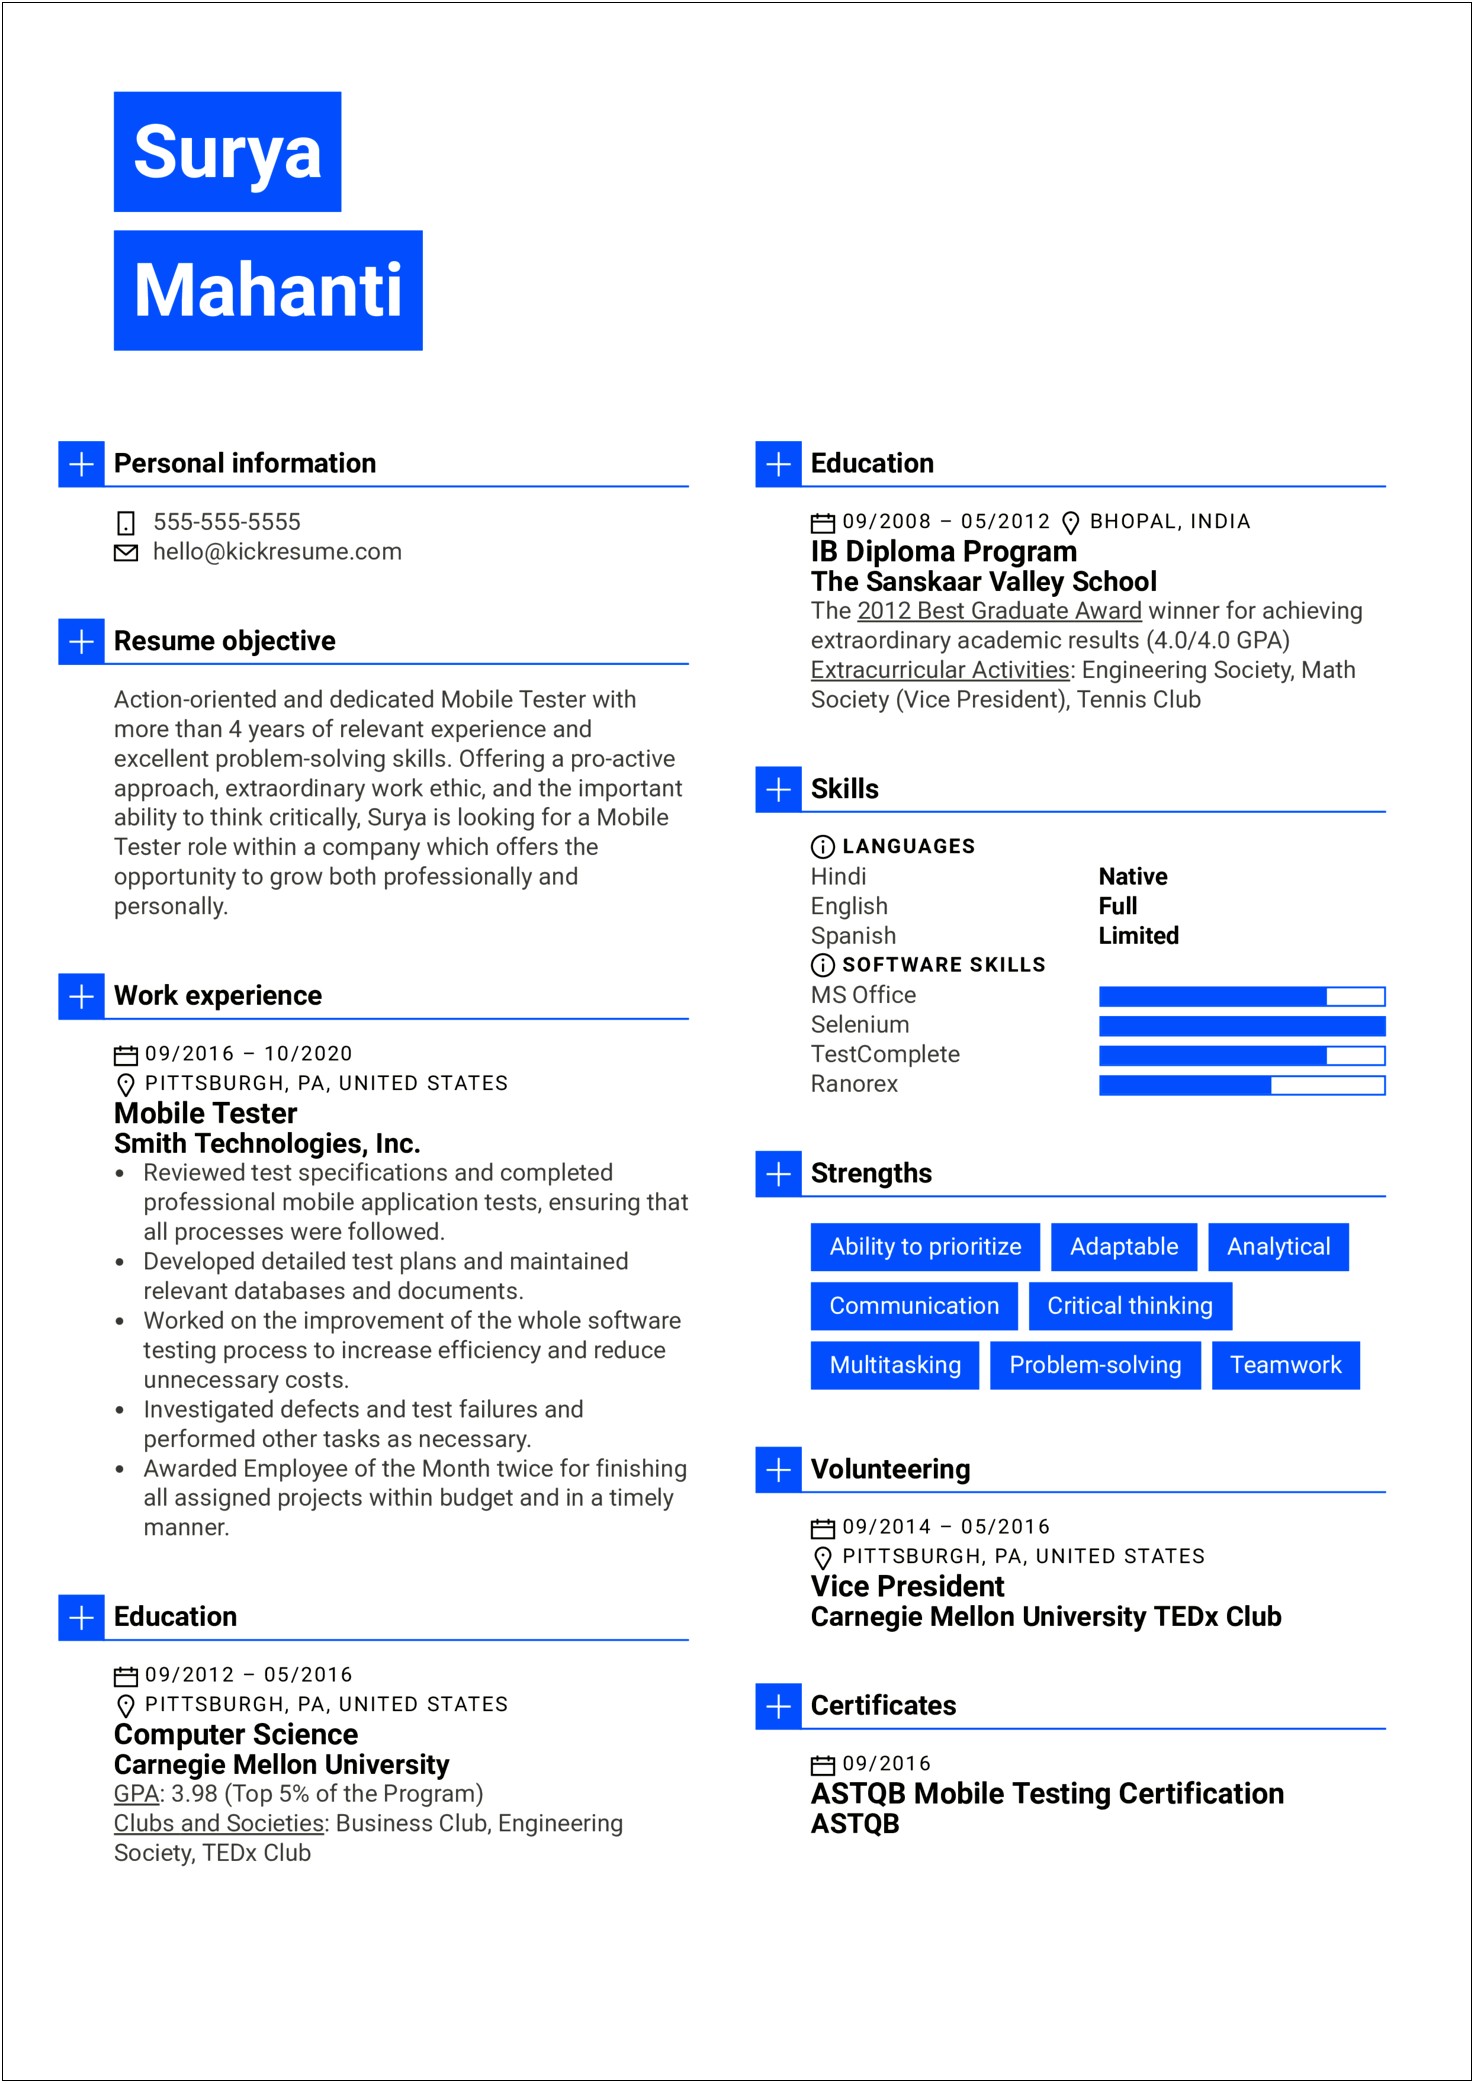 Skills For Computer Science For Resume